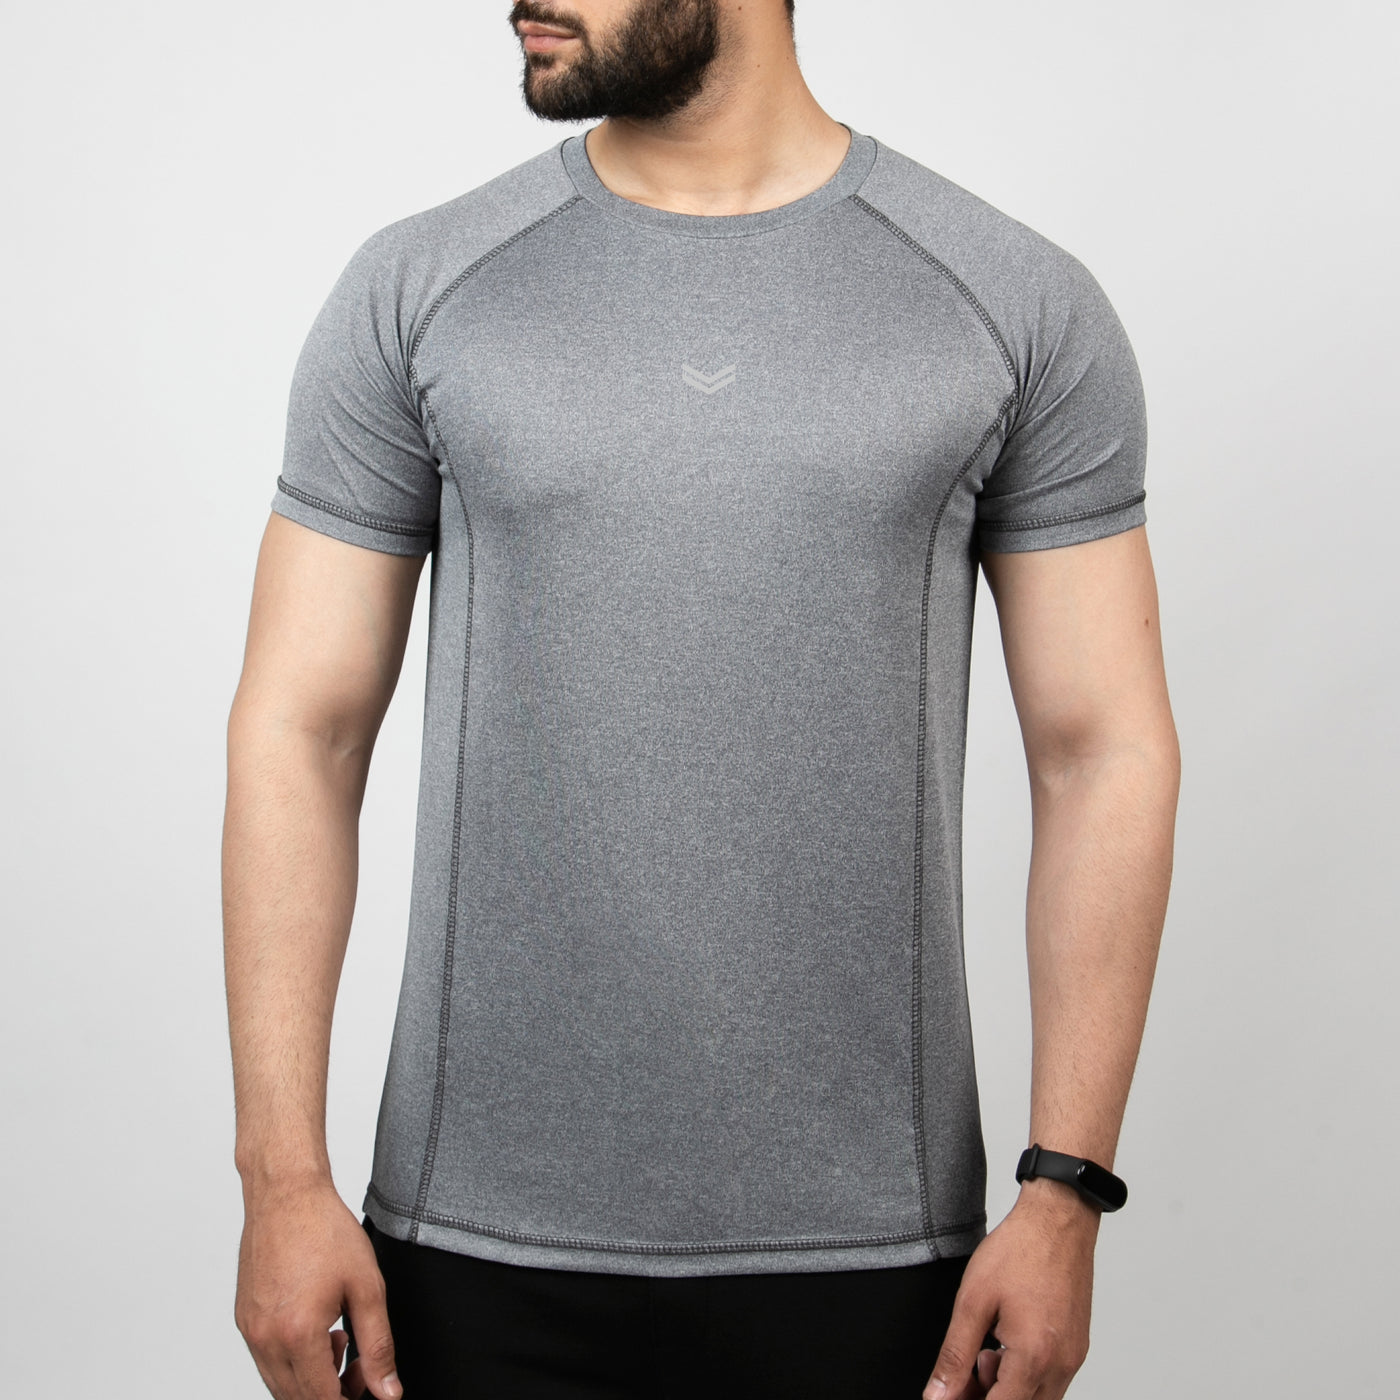 Textured Gray Quick Dry Tee with Thread Detailing & Reflector Logo